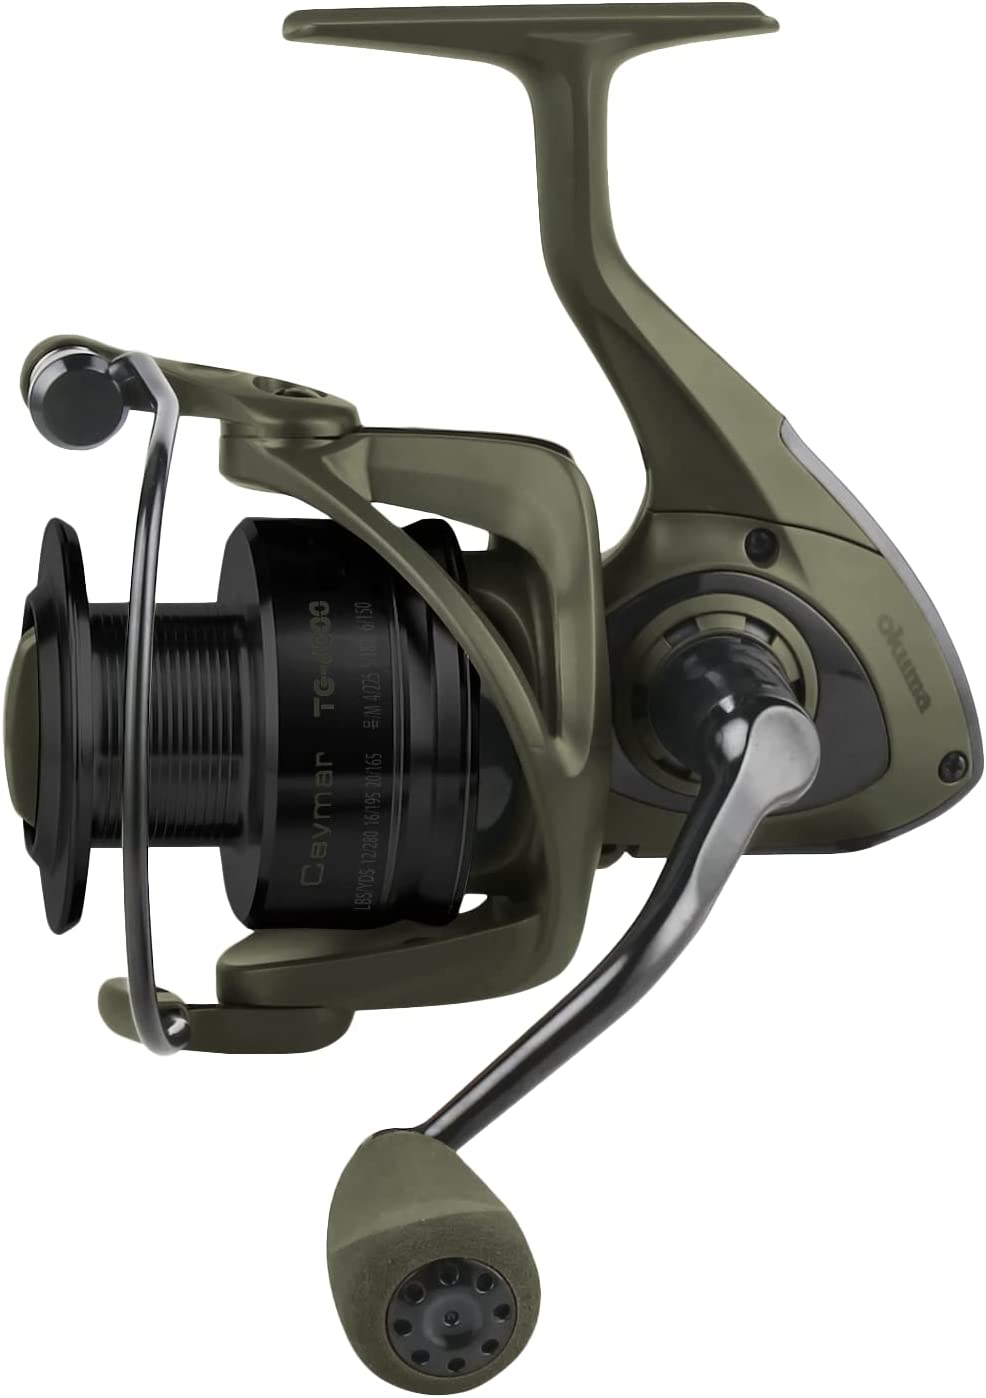 Okuma Fishing Ceymar Limited Edition Tactical Green Spinning Reel, Size 1000  - 729863, Ice Fishing Reels at Sportsman's Guide